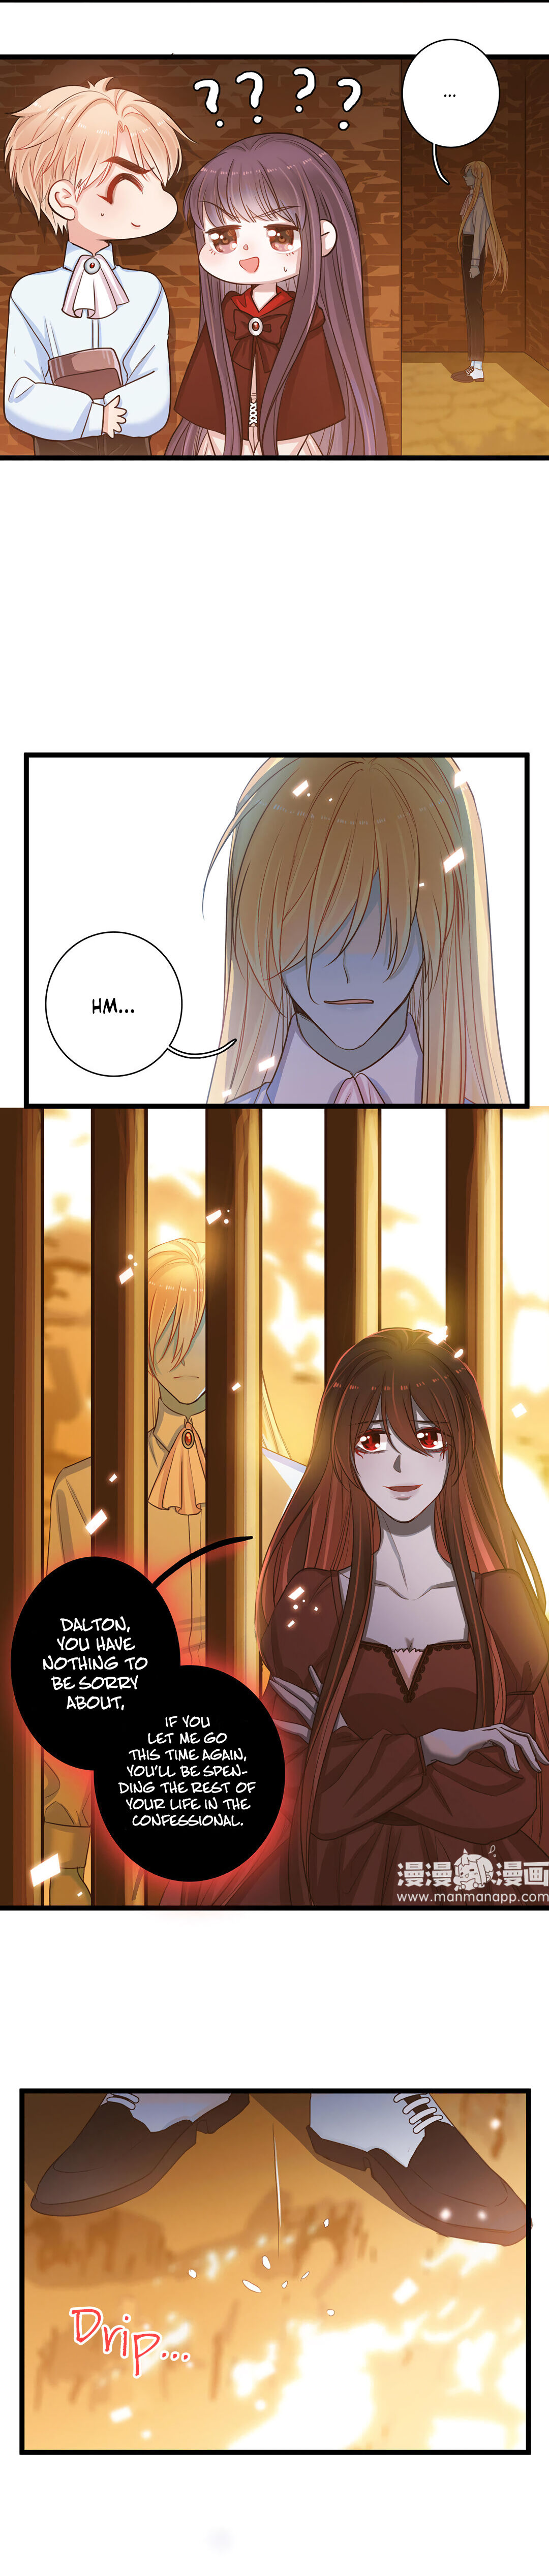 The Witch’s Daily Life chapter 10